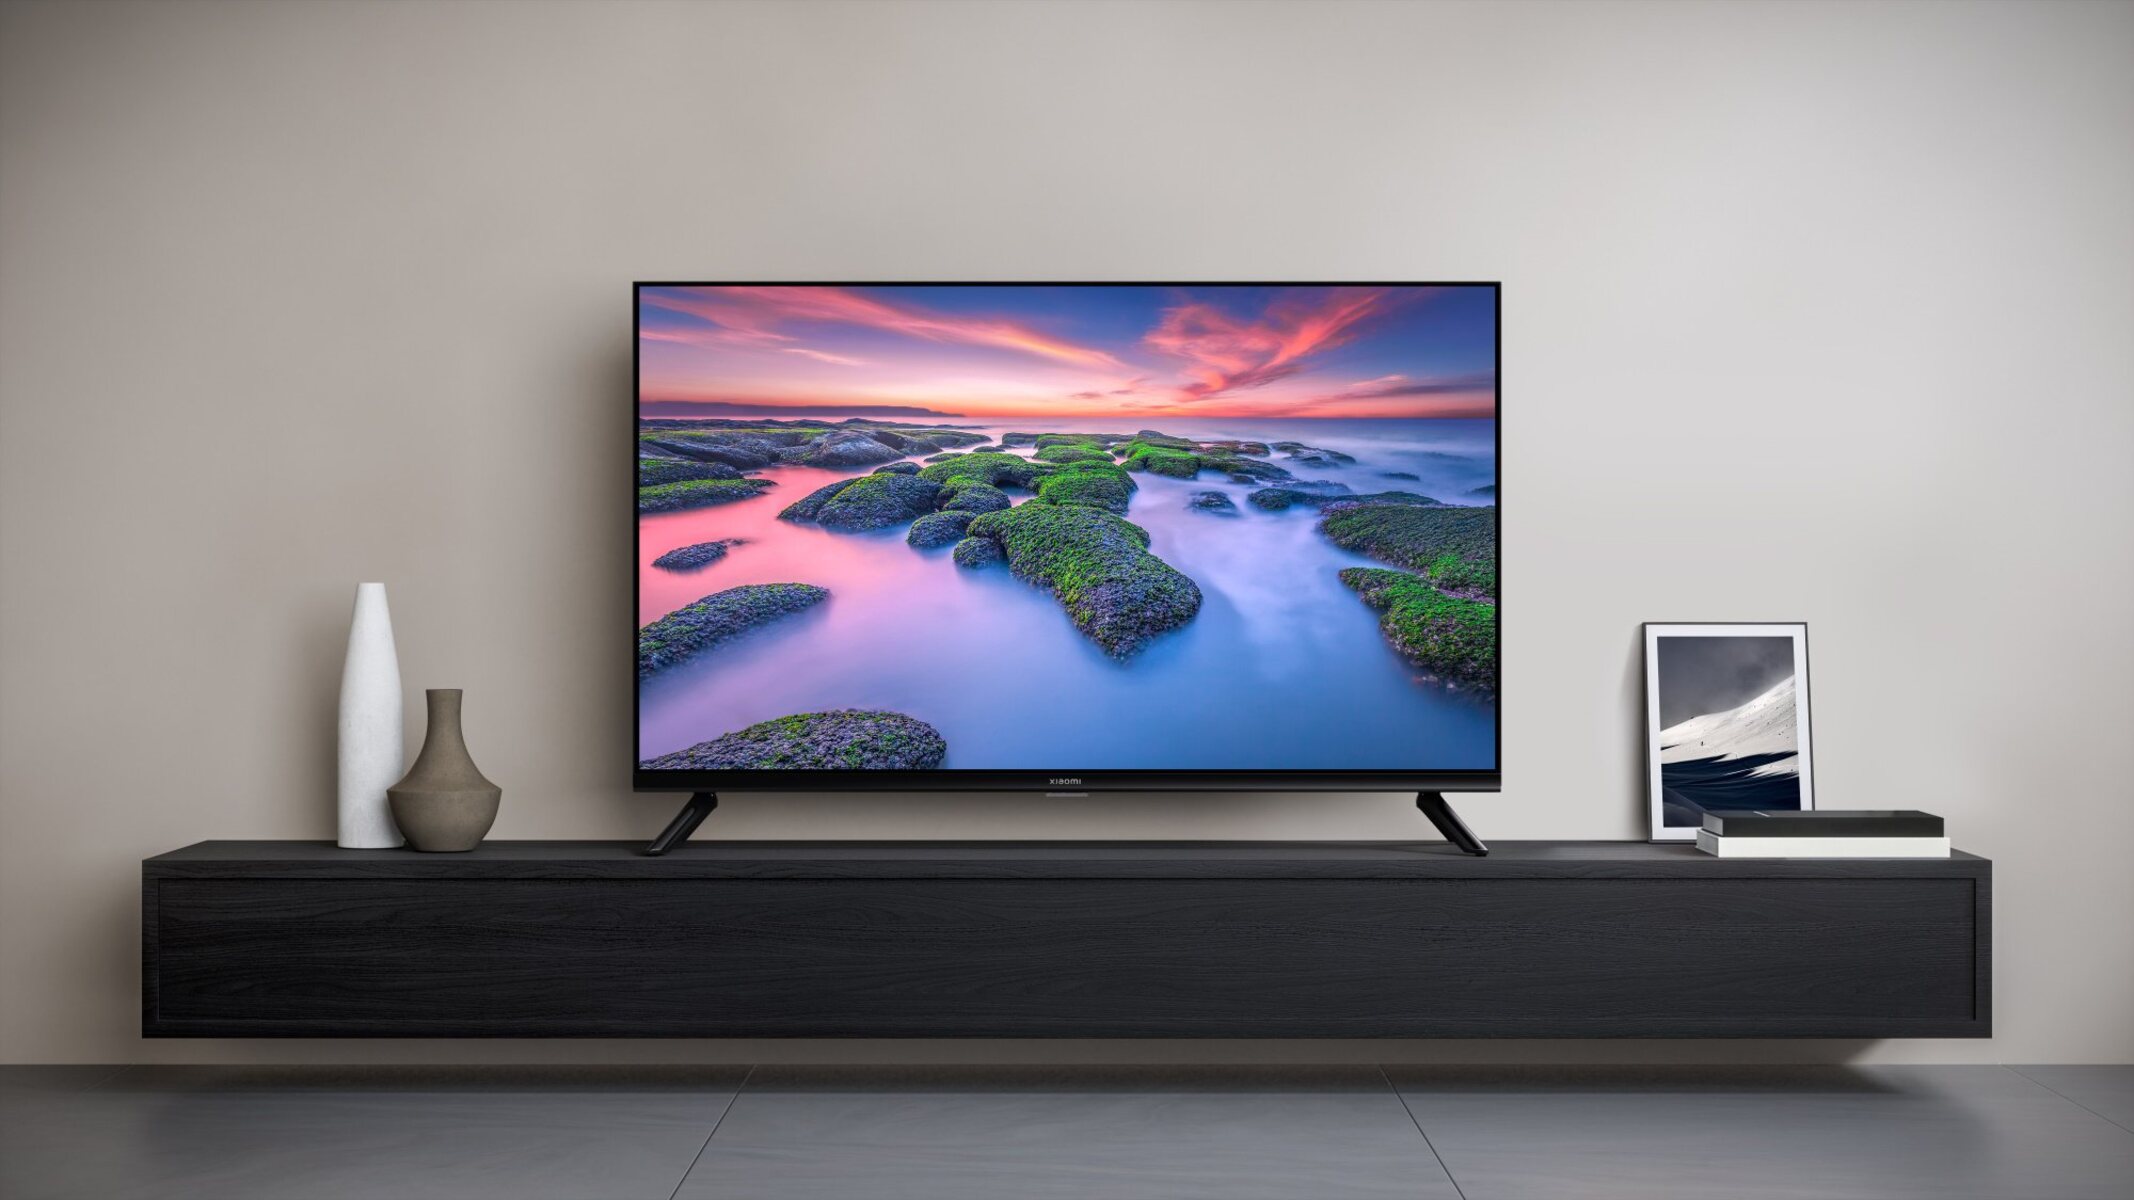 Troubleshooting Xiaomi TV: Common Issues And Solutions